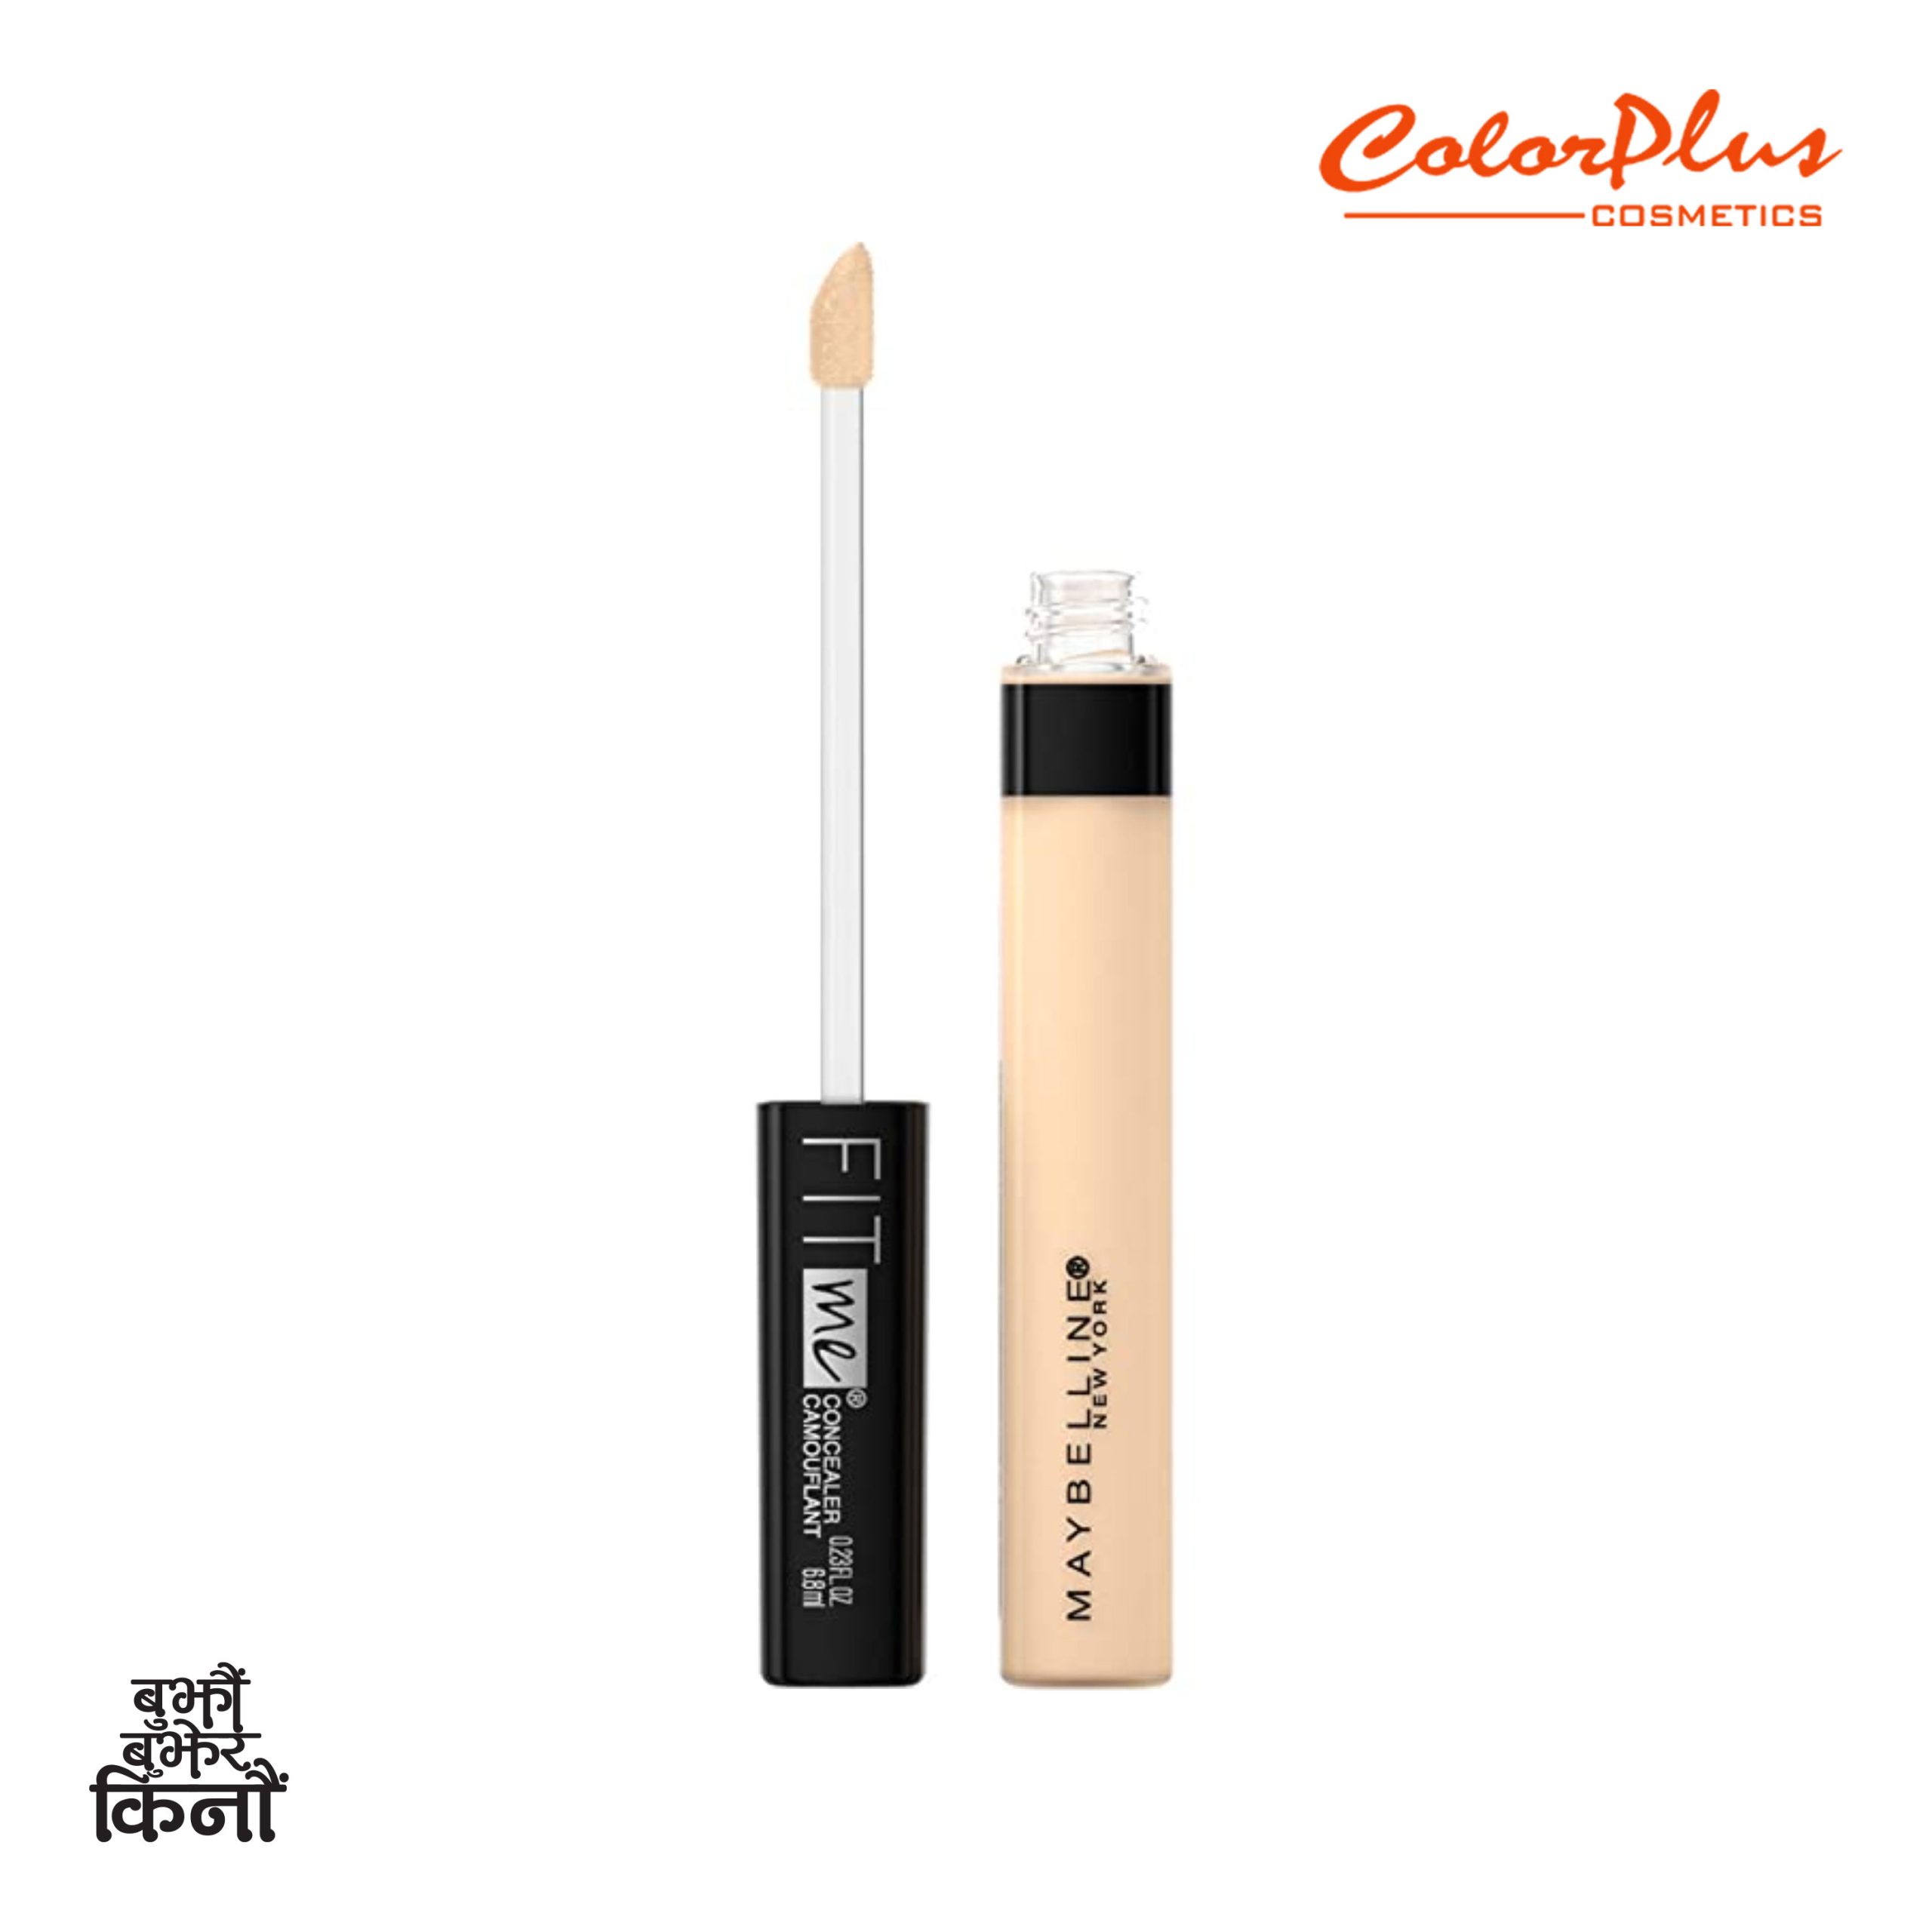 ColorPlus Cosmetics Maybelline Fitme Liquid Concealer 20 sand 1 scaled